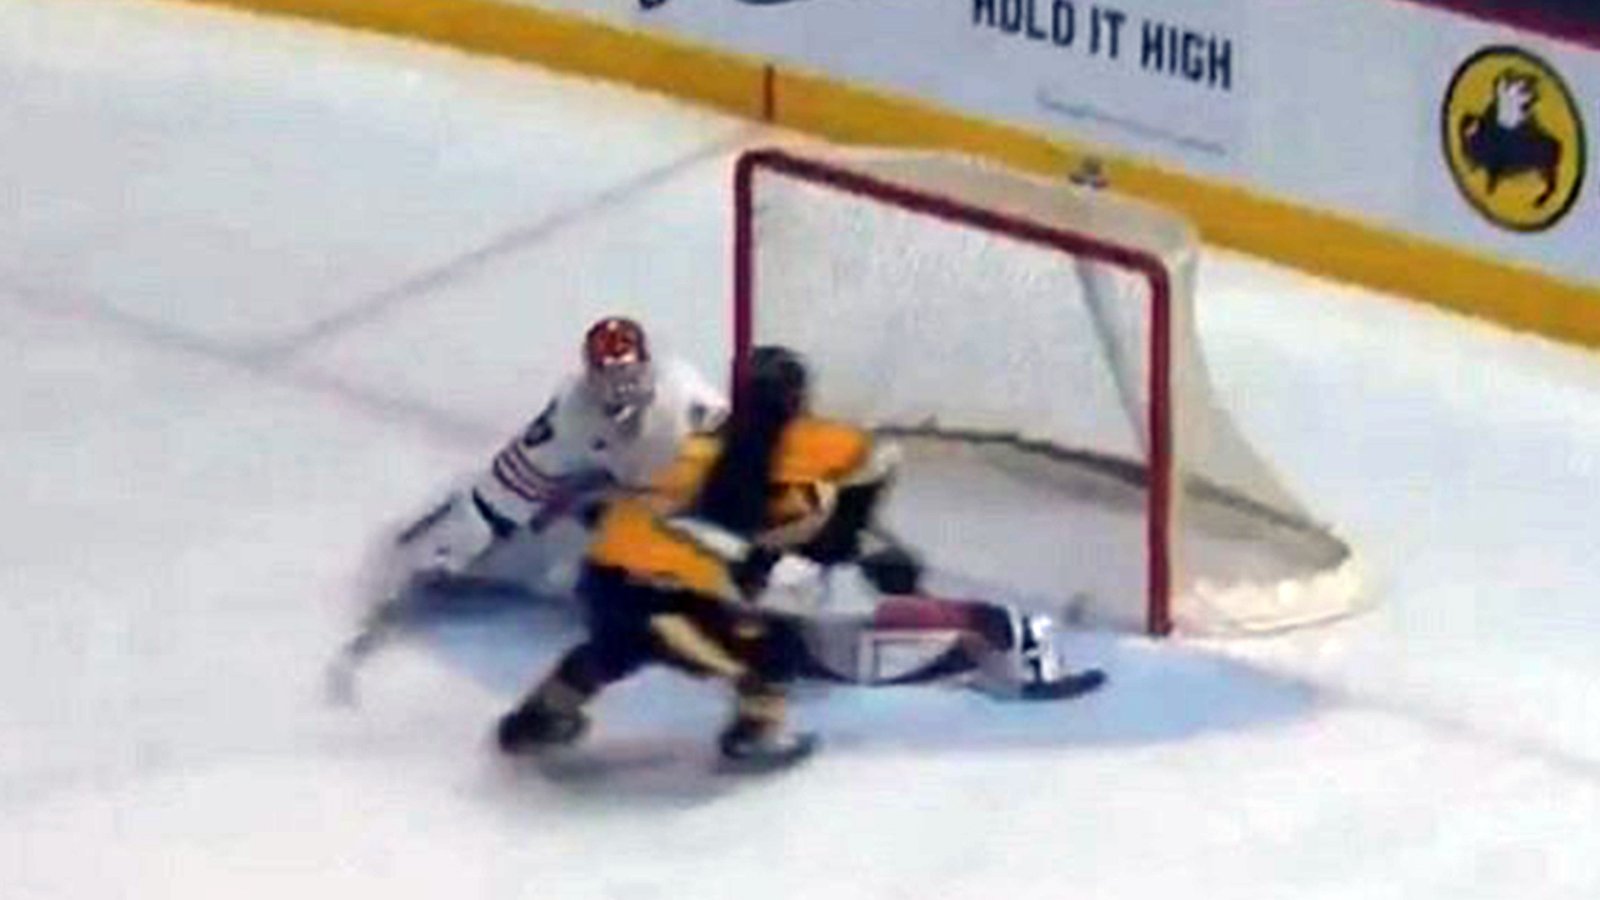 Flyers prospect Strome has beautiful goal called back after arena lights shut off!